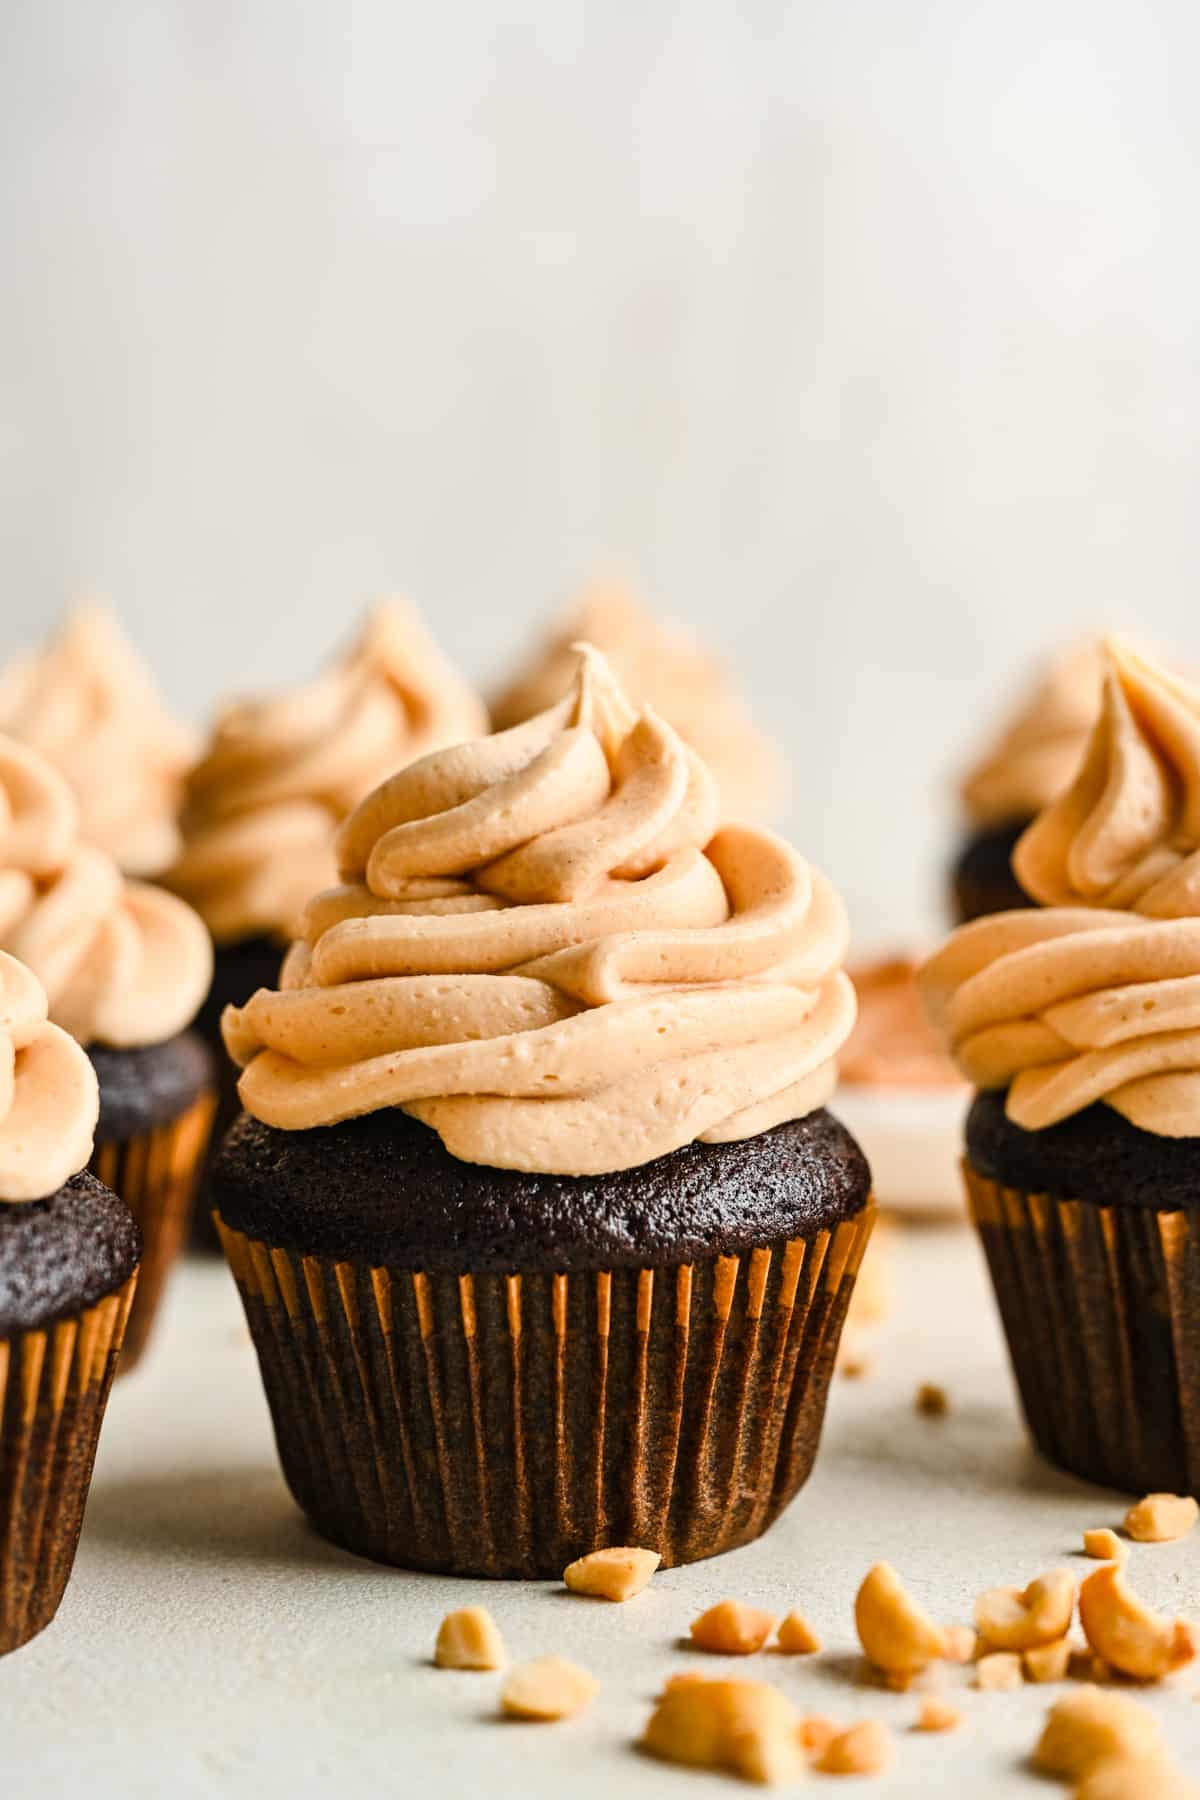 Peanut butter frosting on rows of chocolate cupcakes.